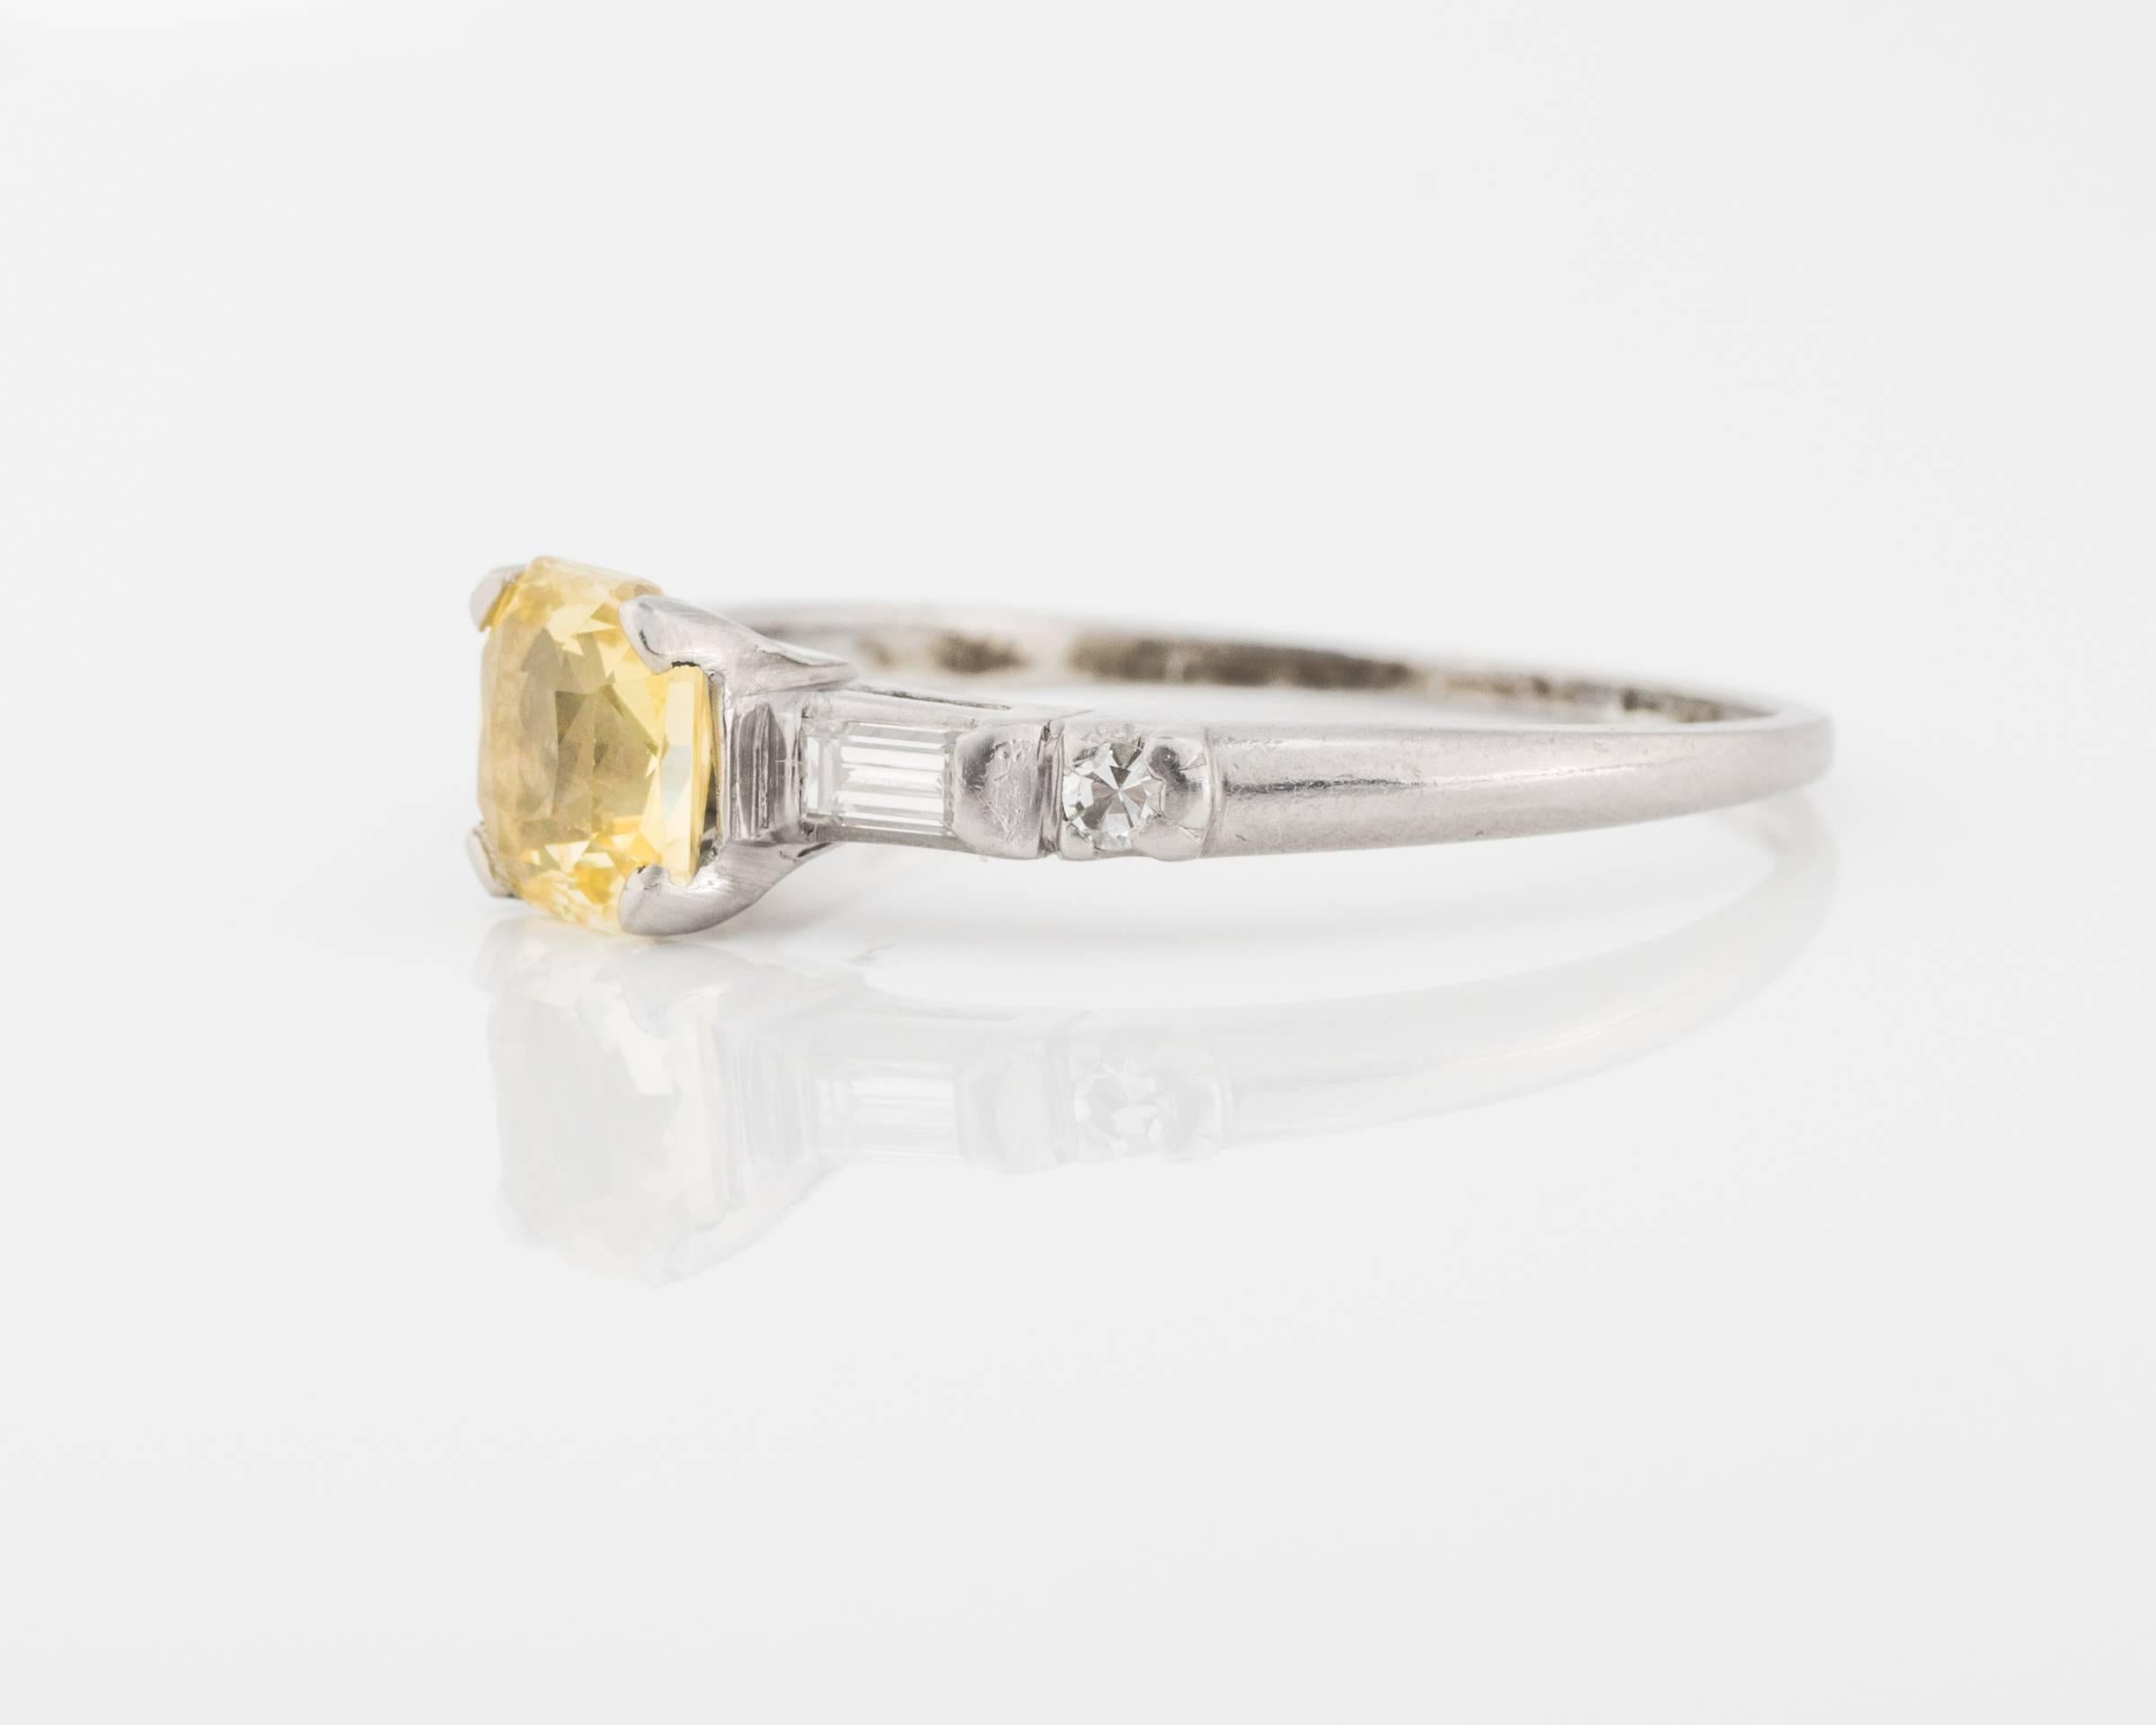 Platinum Ring Featuring 1.14 Carat Unheated Sapphire. Square-Radiant Cut, VS clarity and Pale Canary Yellow in Color. 
Classic 4-prong setting holds the sapphire. Nice dainty shank, 2mm. 
Accent diamonds - round single cut diamond (0.01 carat) and